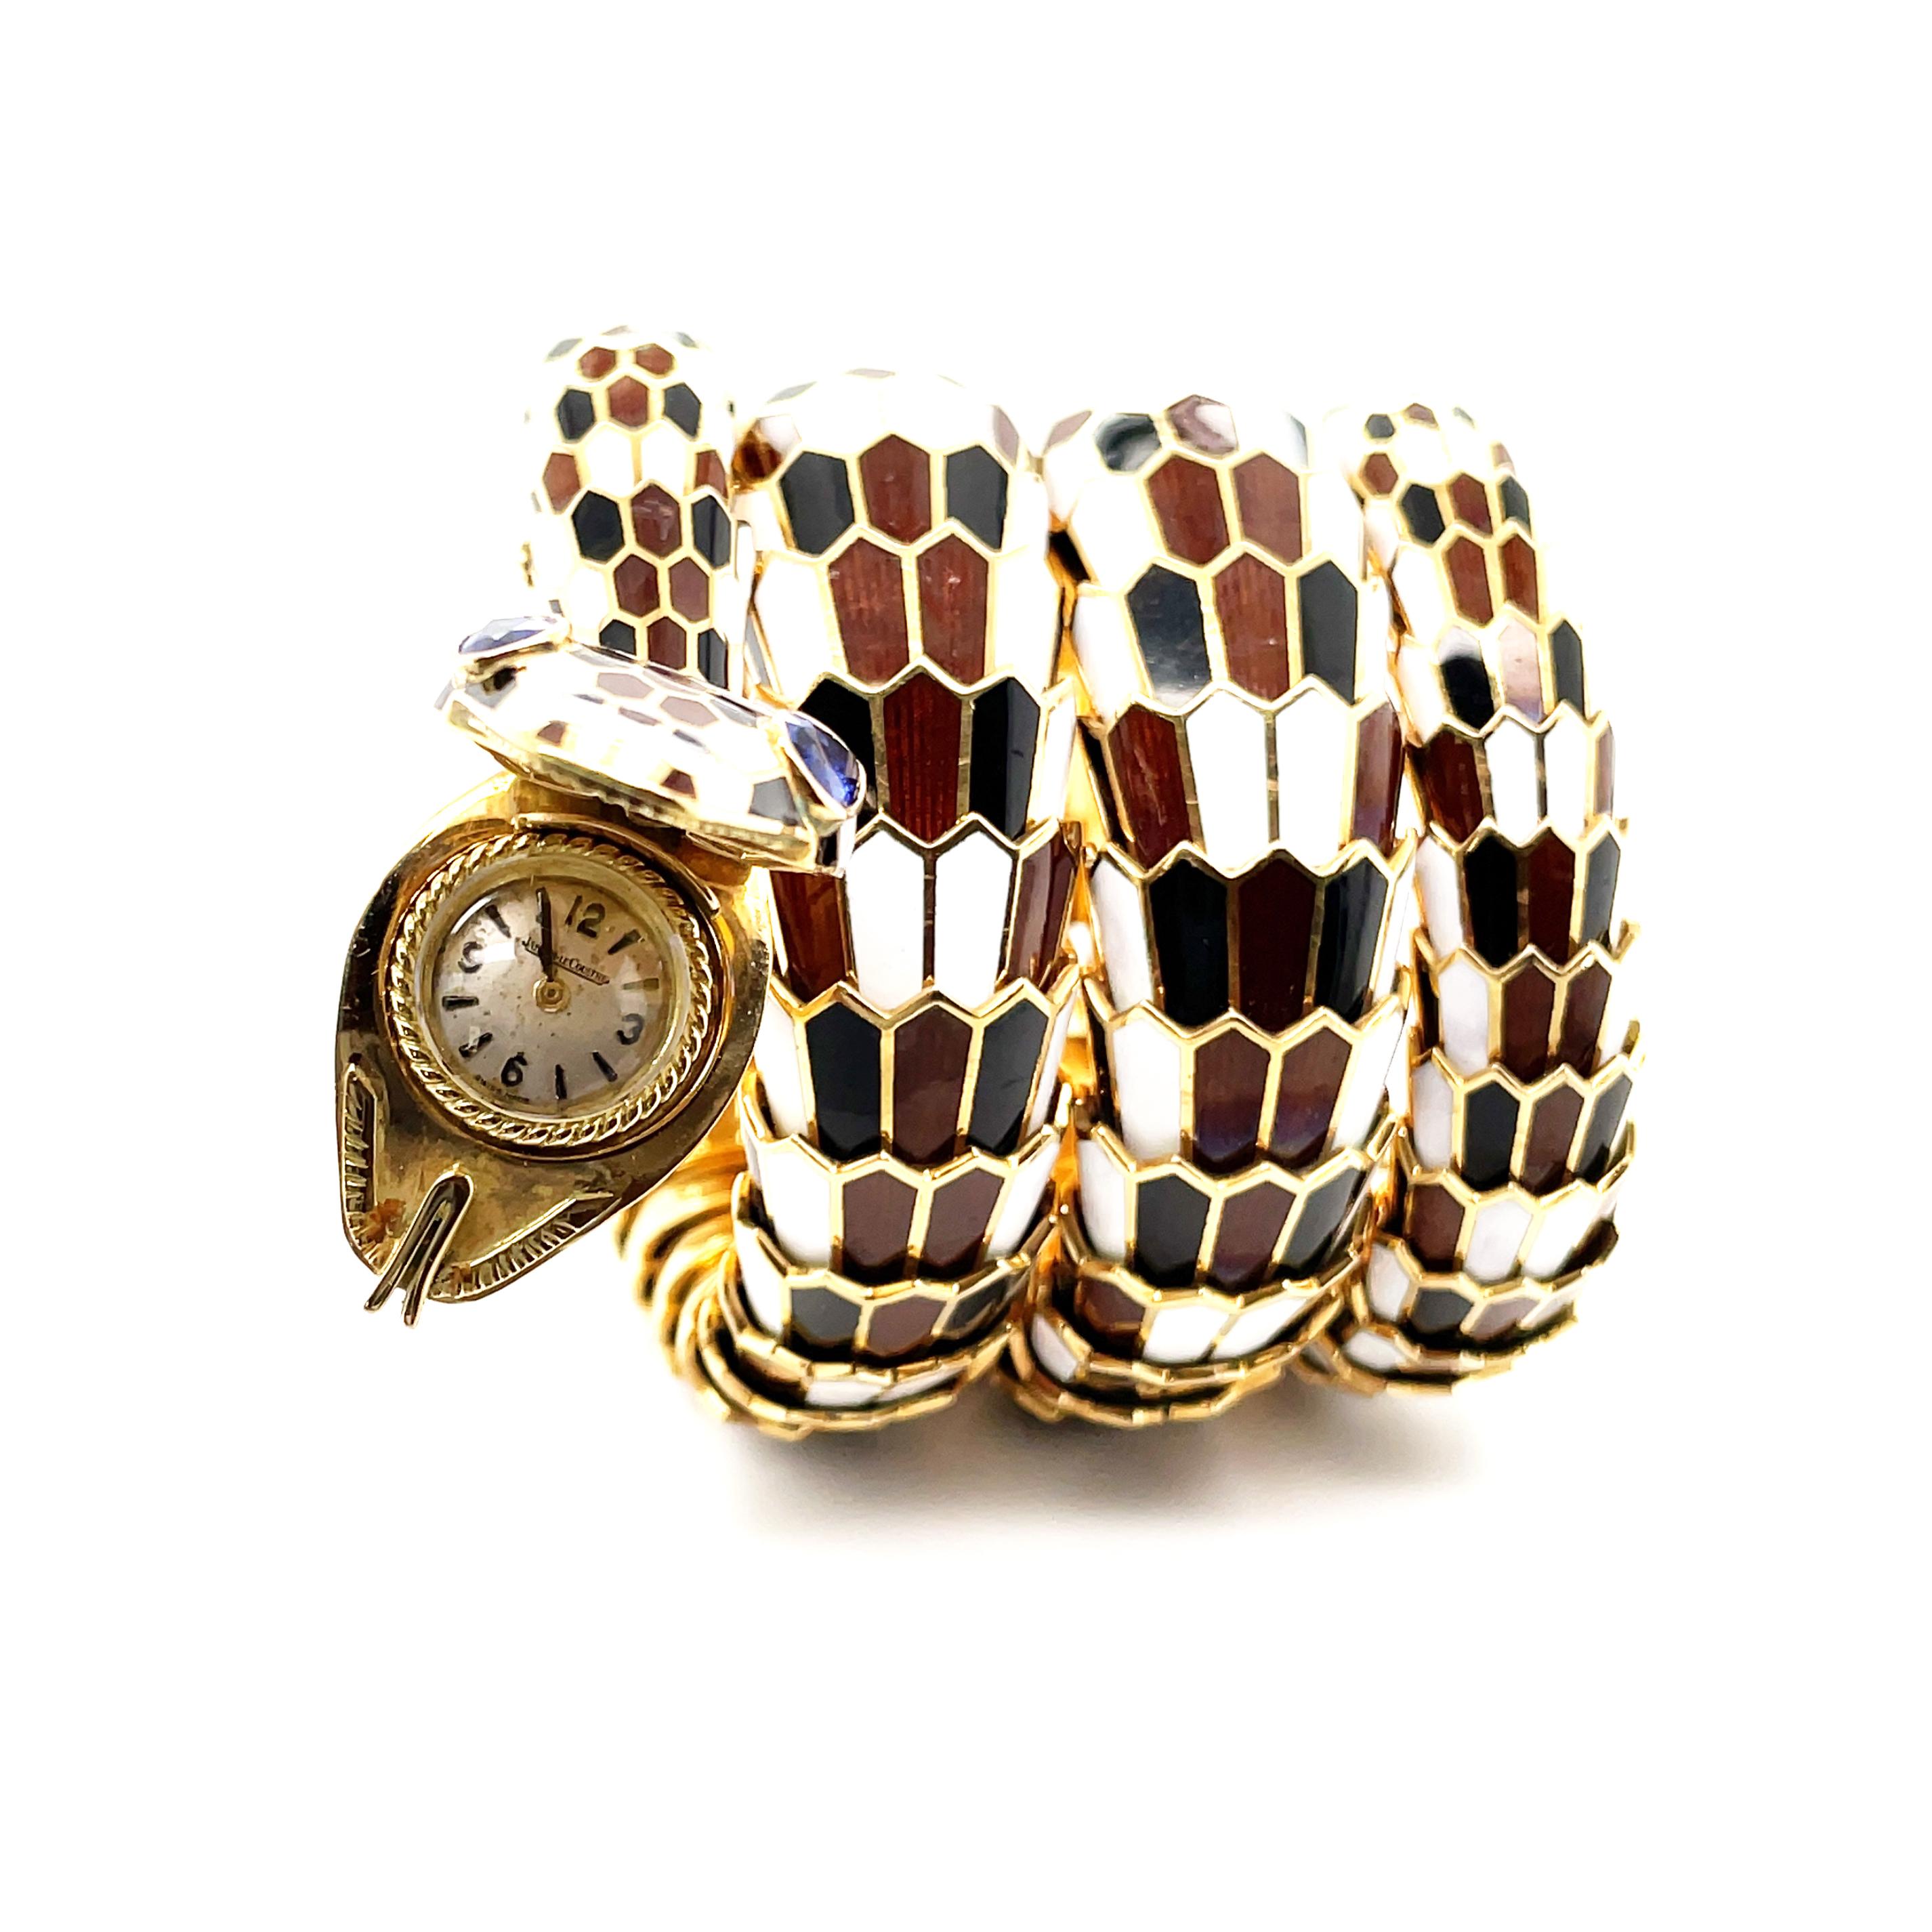 Bulgari Serpenti Watch in Multi-Colored Enamel, Jaeger Le Coultre, ca. 1970s

An iconic Serpenti 18k gold watch bracelet by Bulgari from the 1970s with a Jaeger Le Coultre watch.
The scales of the flexible snake are in various skin colored enamel